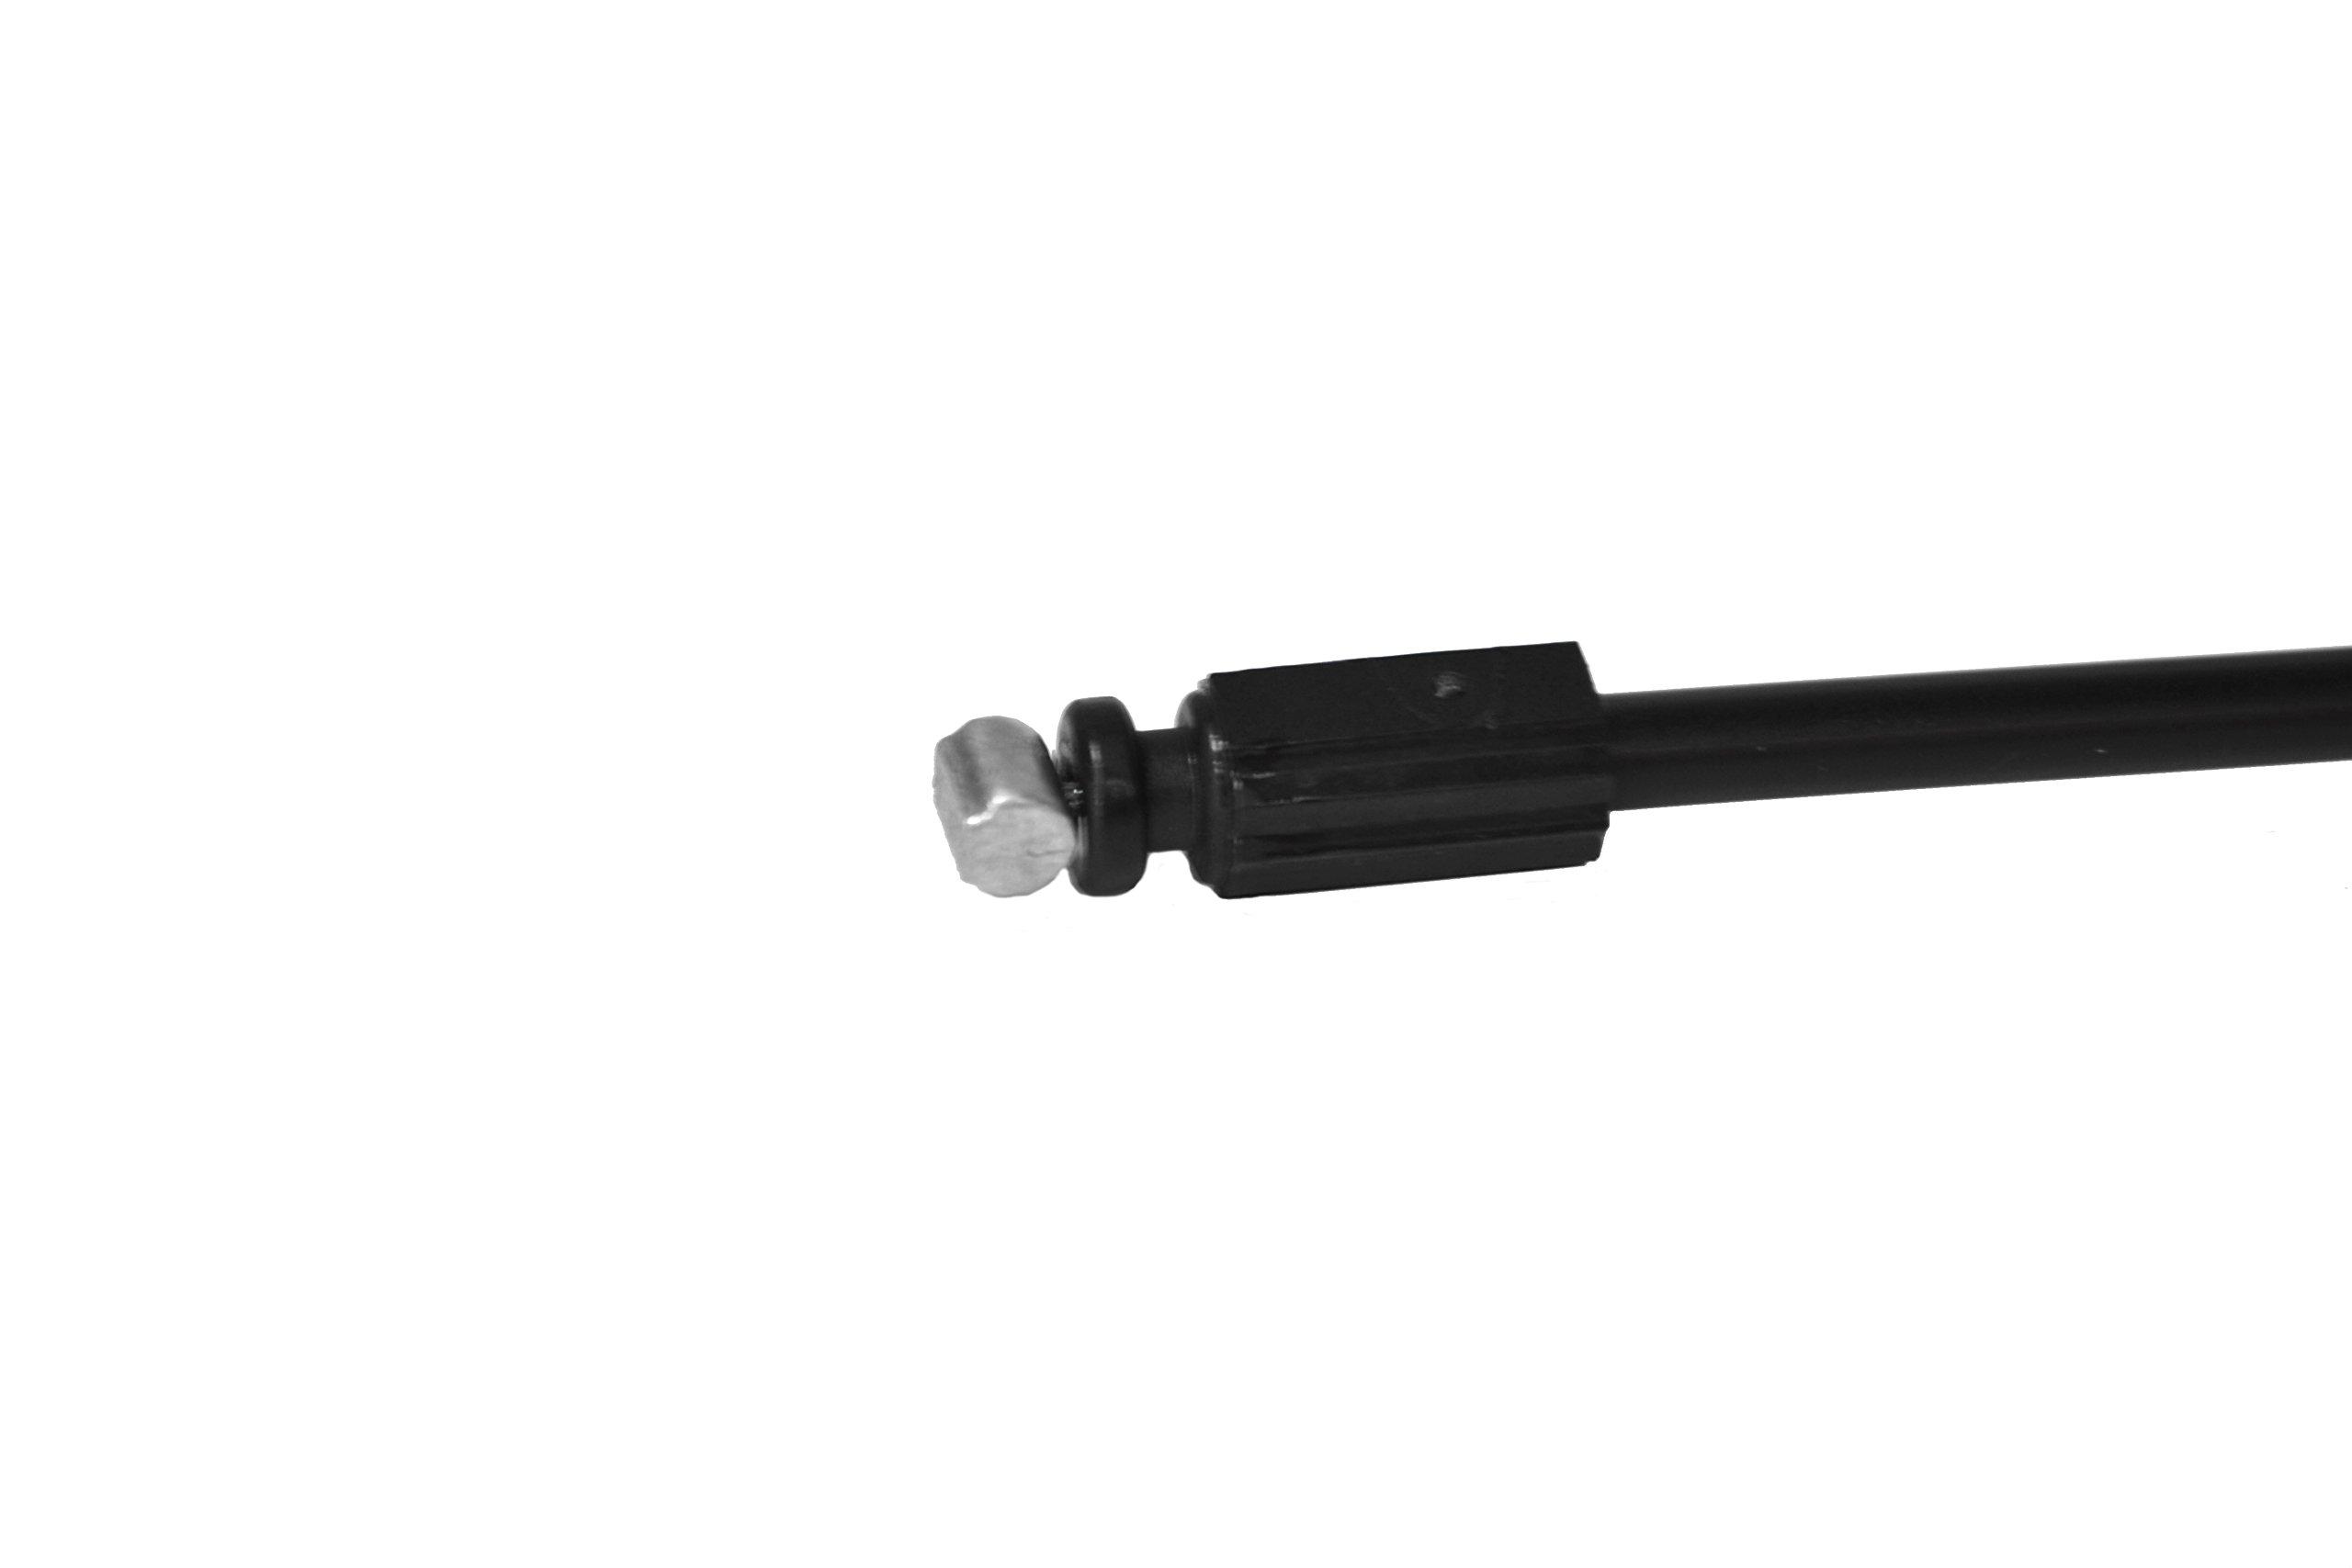 Recliner-Handles Replacement Cable 3.85" Exposed Wire, 6mm Barrel, 40.25" Overall Length with S-Tip